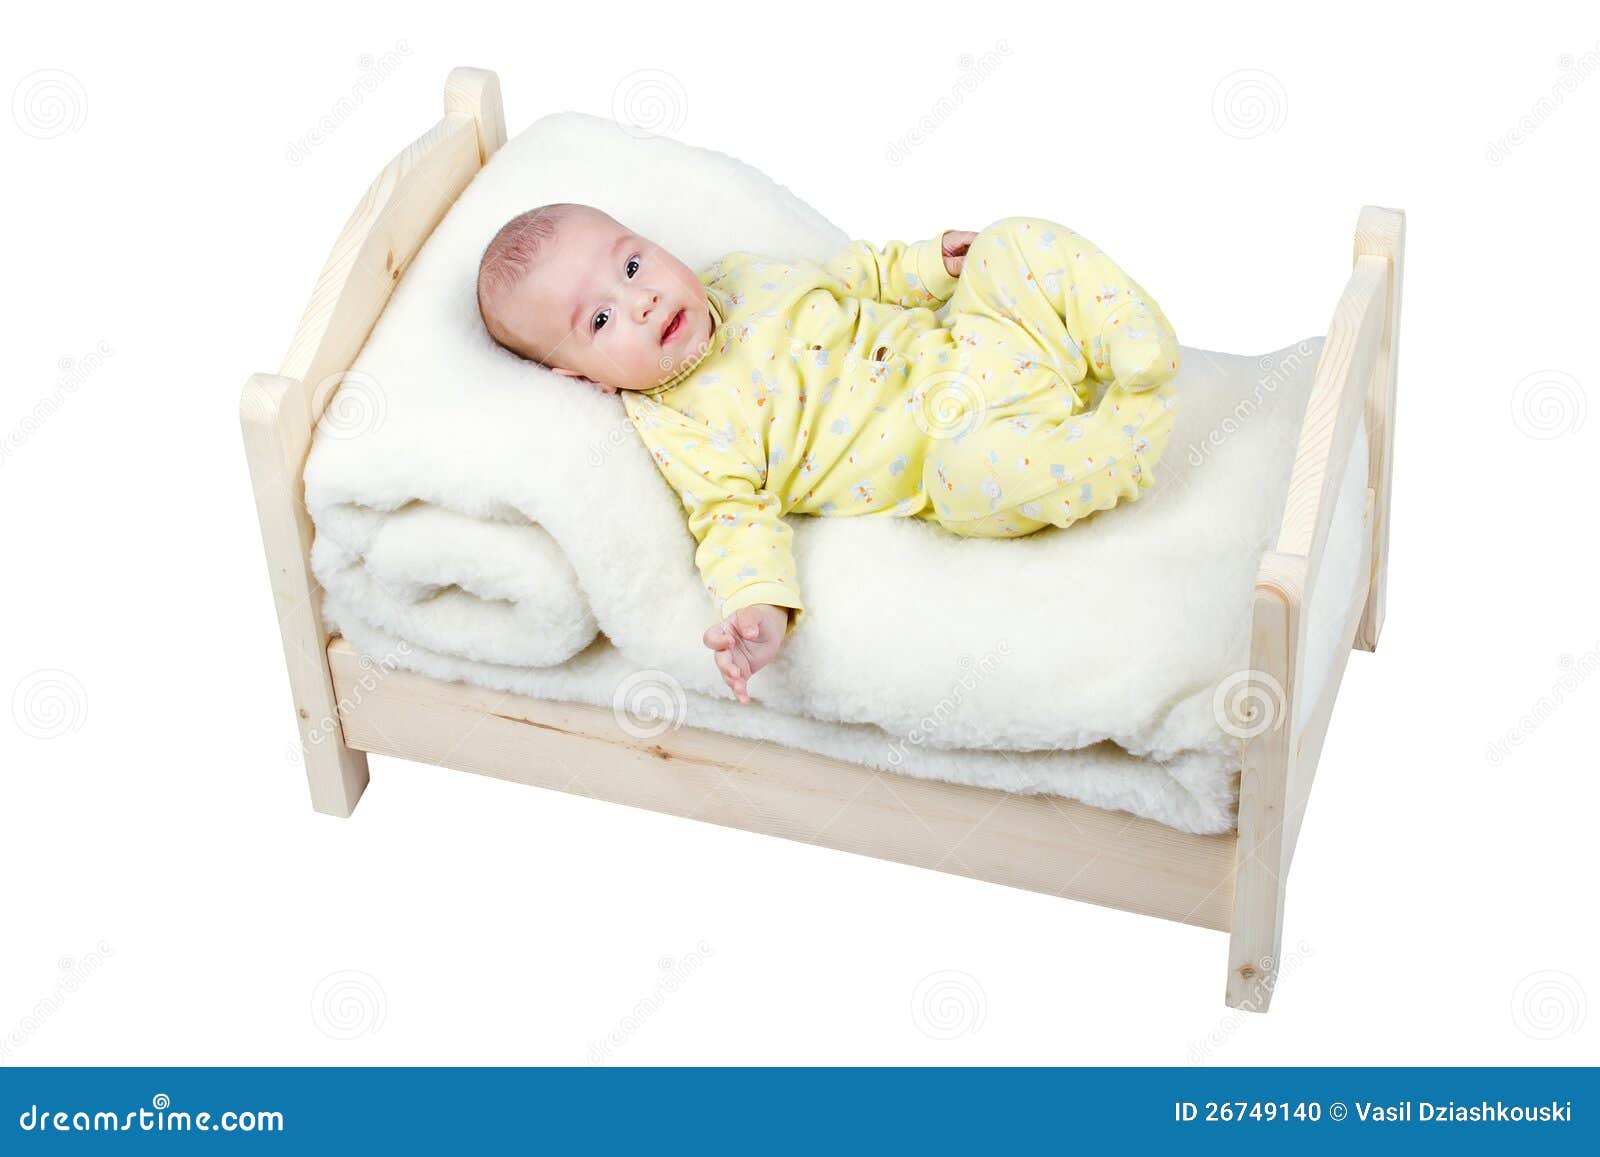 Cheerful baby lies in a wooden crib.